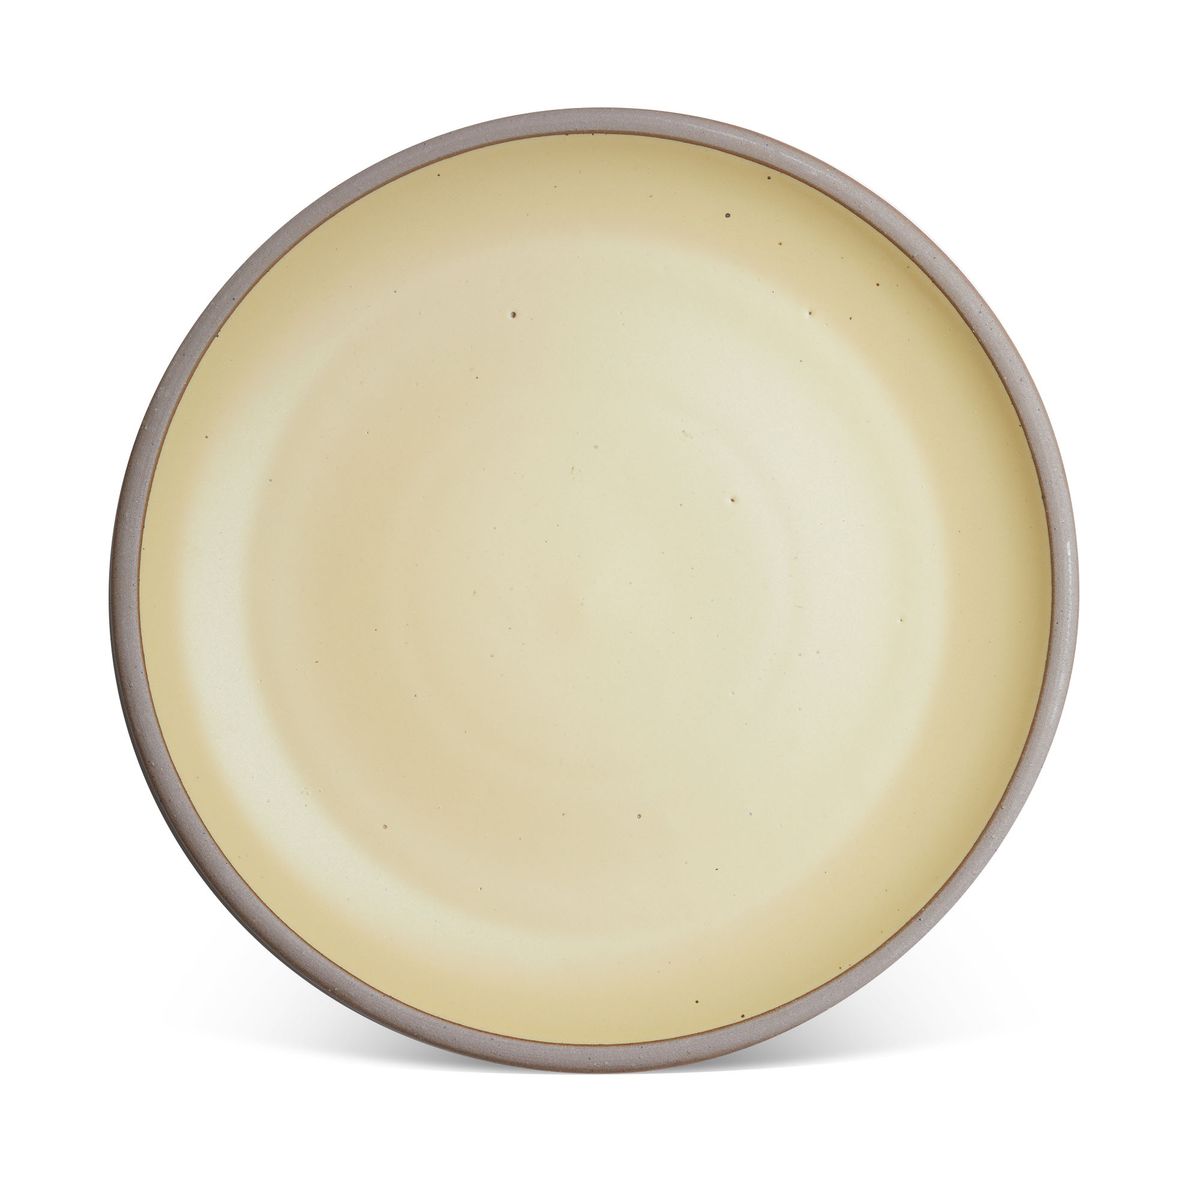 A large ceramic platter in a light butter yellow color featuring iron speckles and an unglazed rim